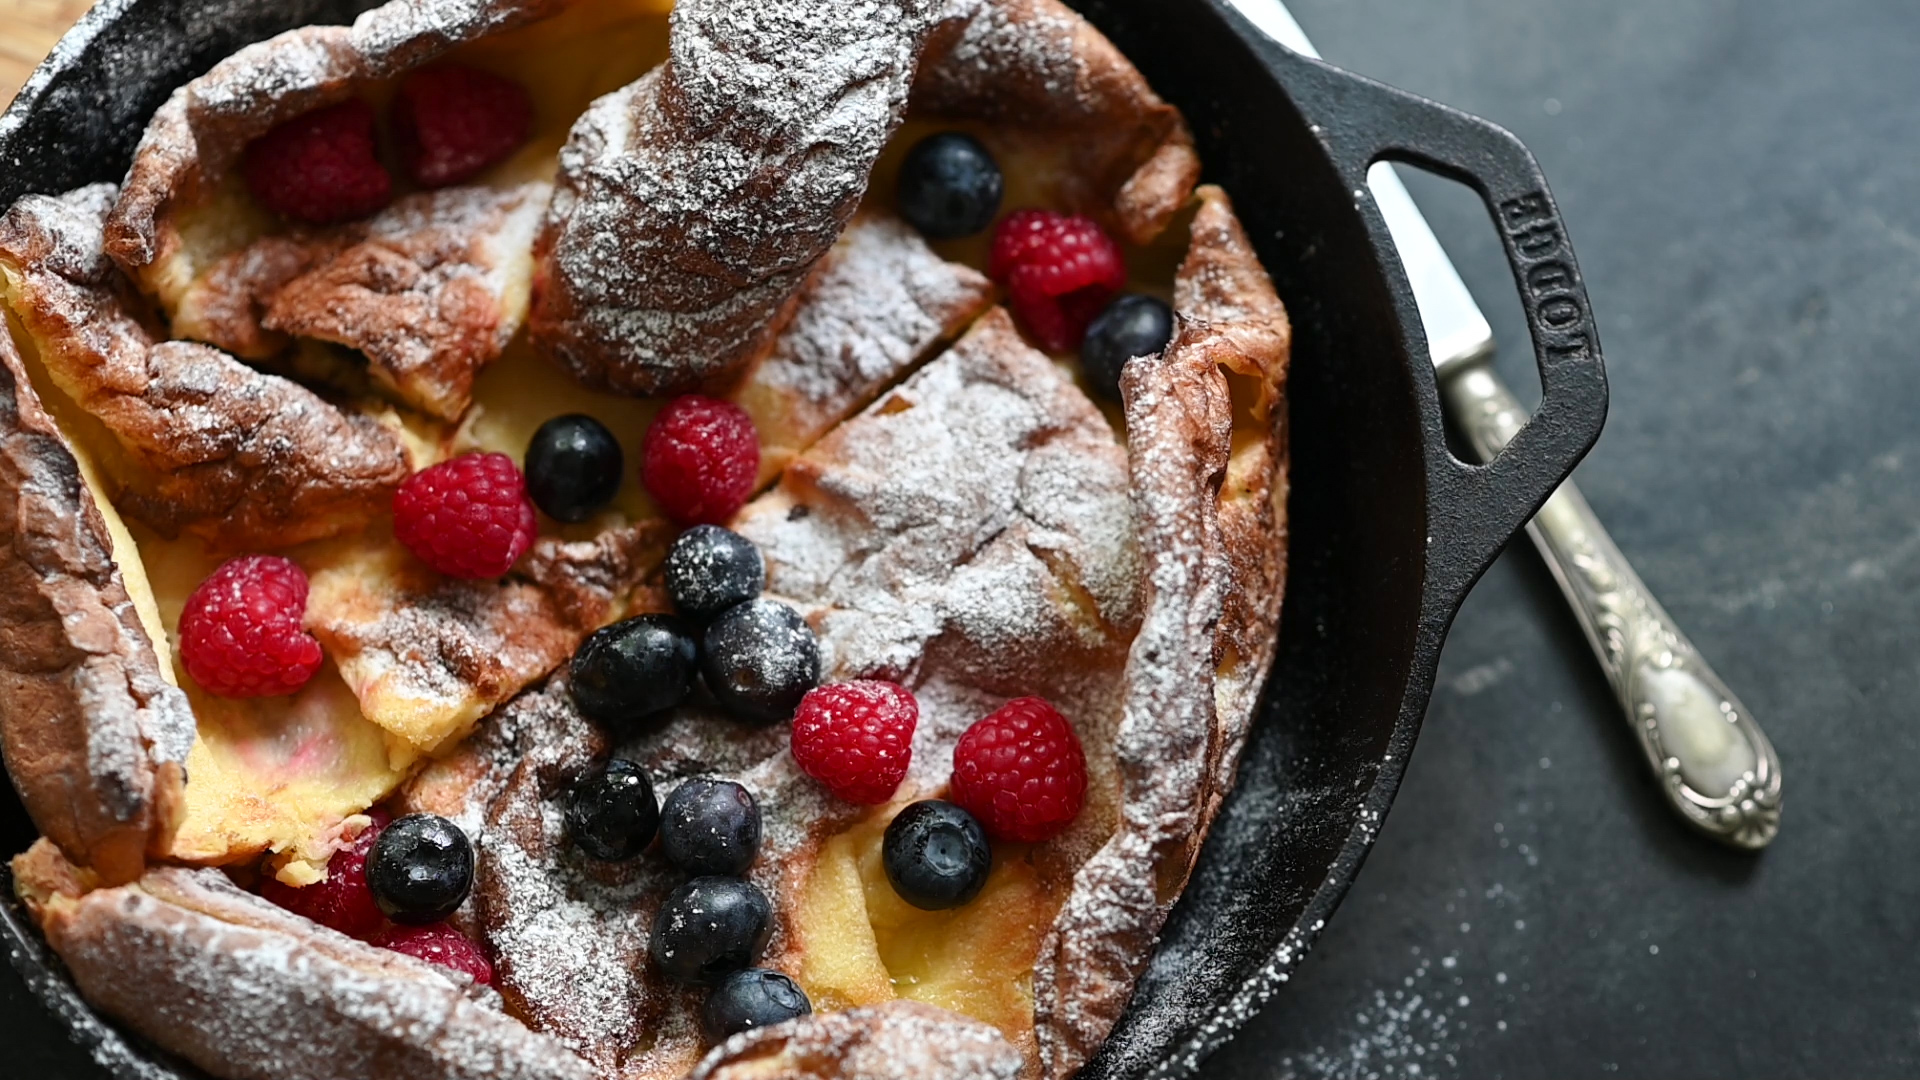 “Dutch Baby”: Oven Baked Pancake (VIDEO)